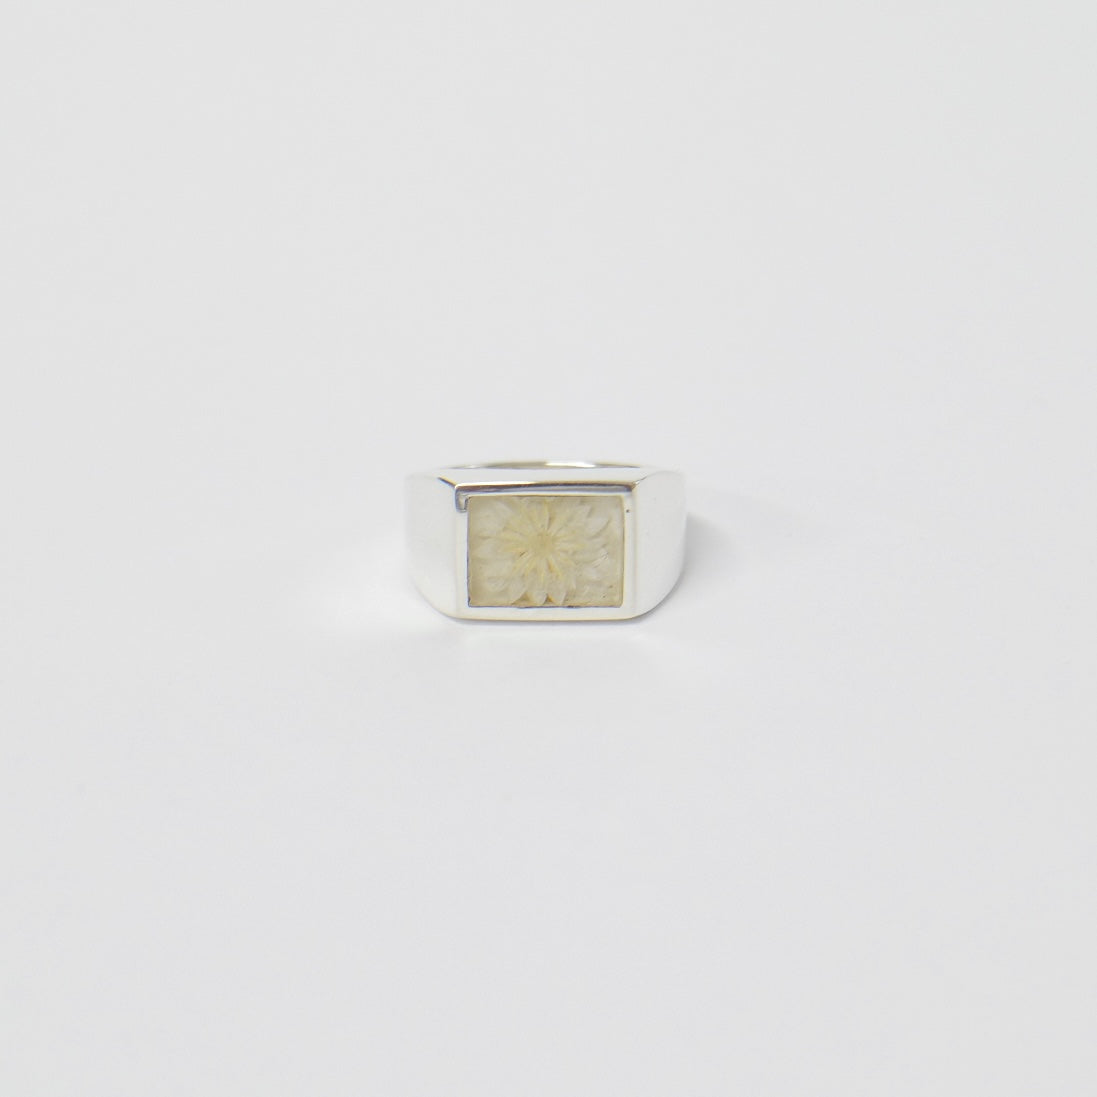 Signet Ring with White Flower